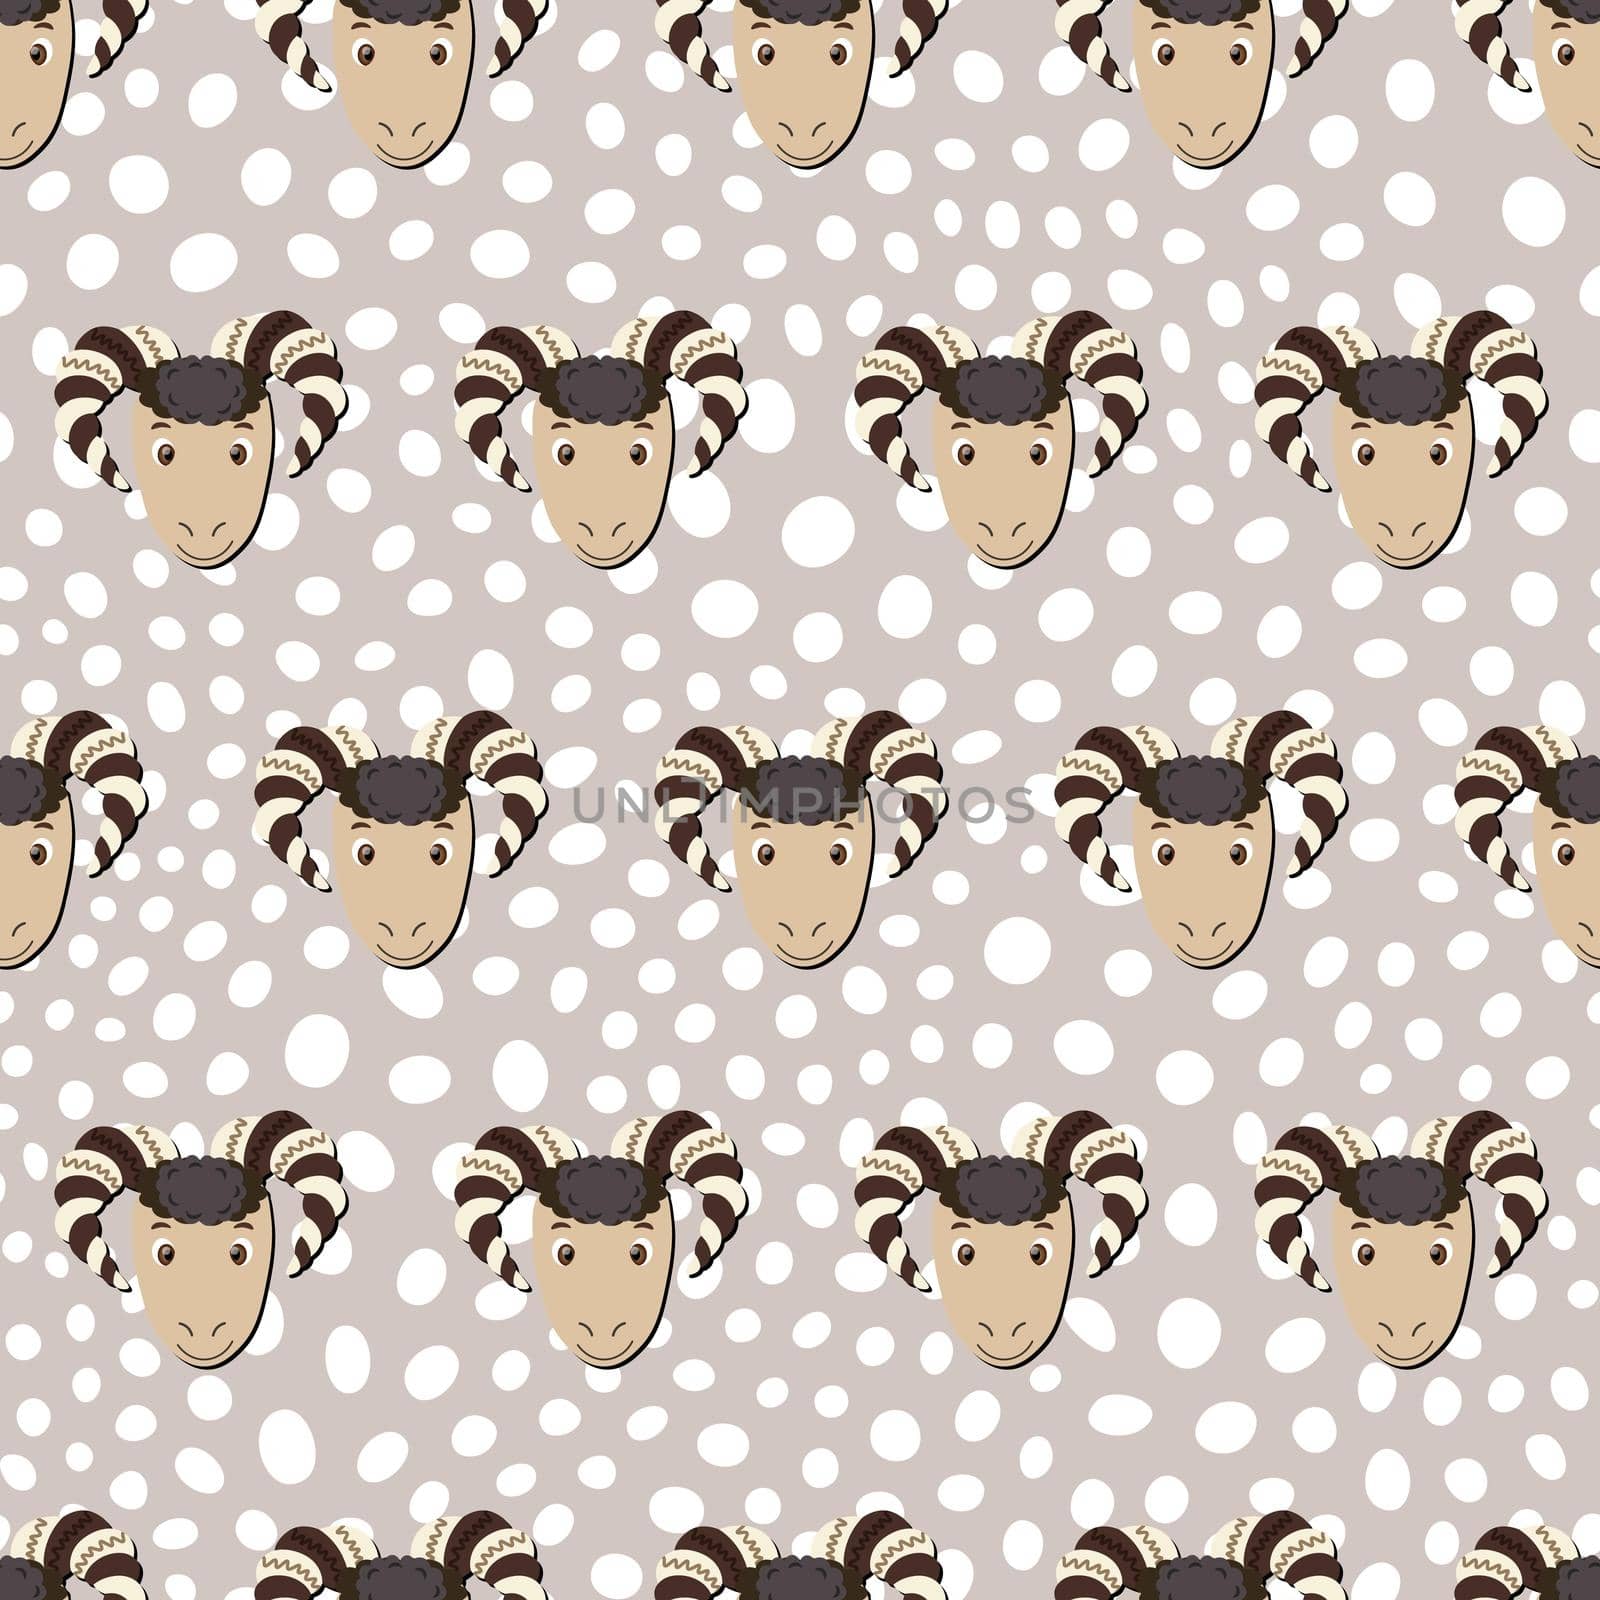 Vector flat animals colorful illustration for kids. Seamless pattern with ram face on beige polka dots background. Cute sheep. Adorable cartoon character. Design for textures, card, fabric, textile. by allaku